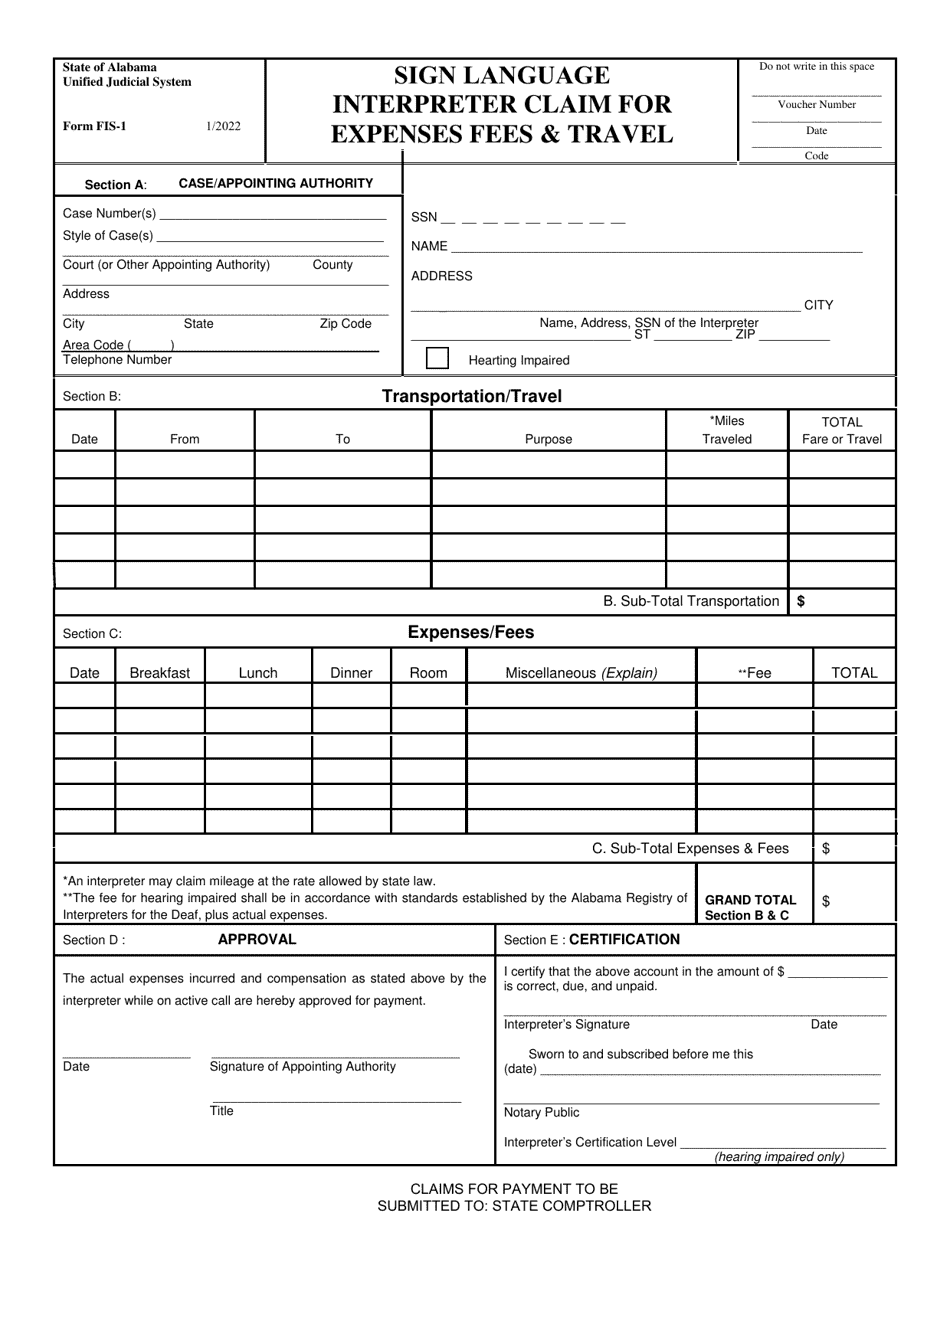 Form FIS-1 Sign Language Interpreter Claim for Expenses Fees  Travel - Alabama, Page 1